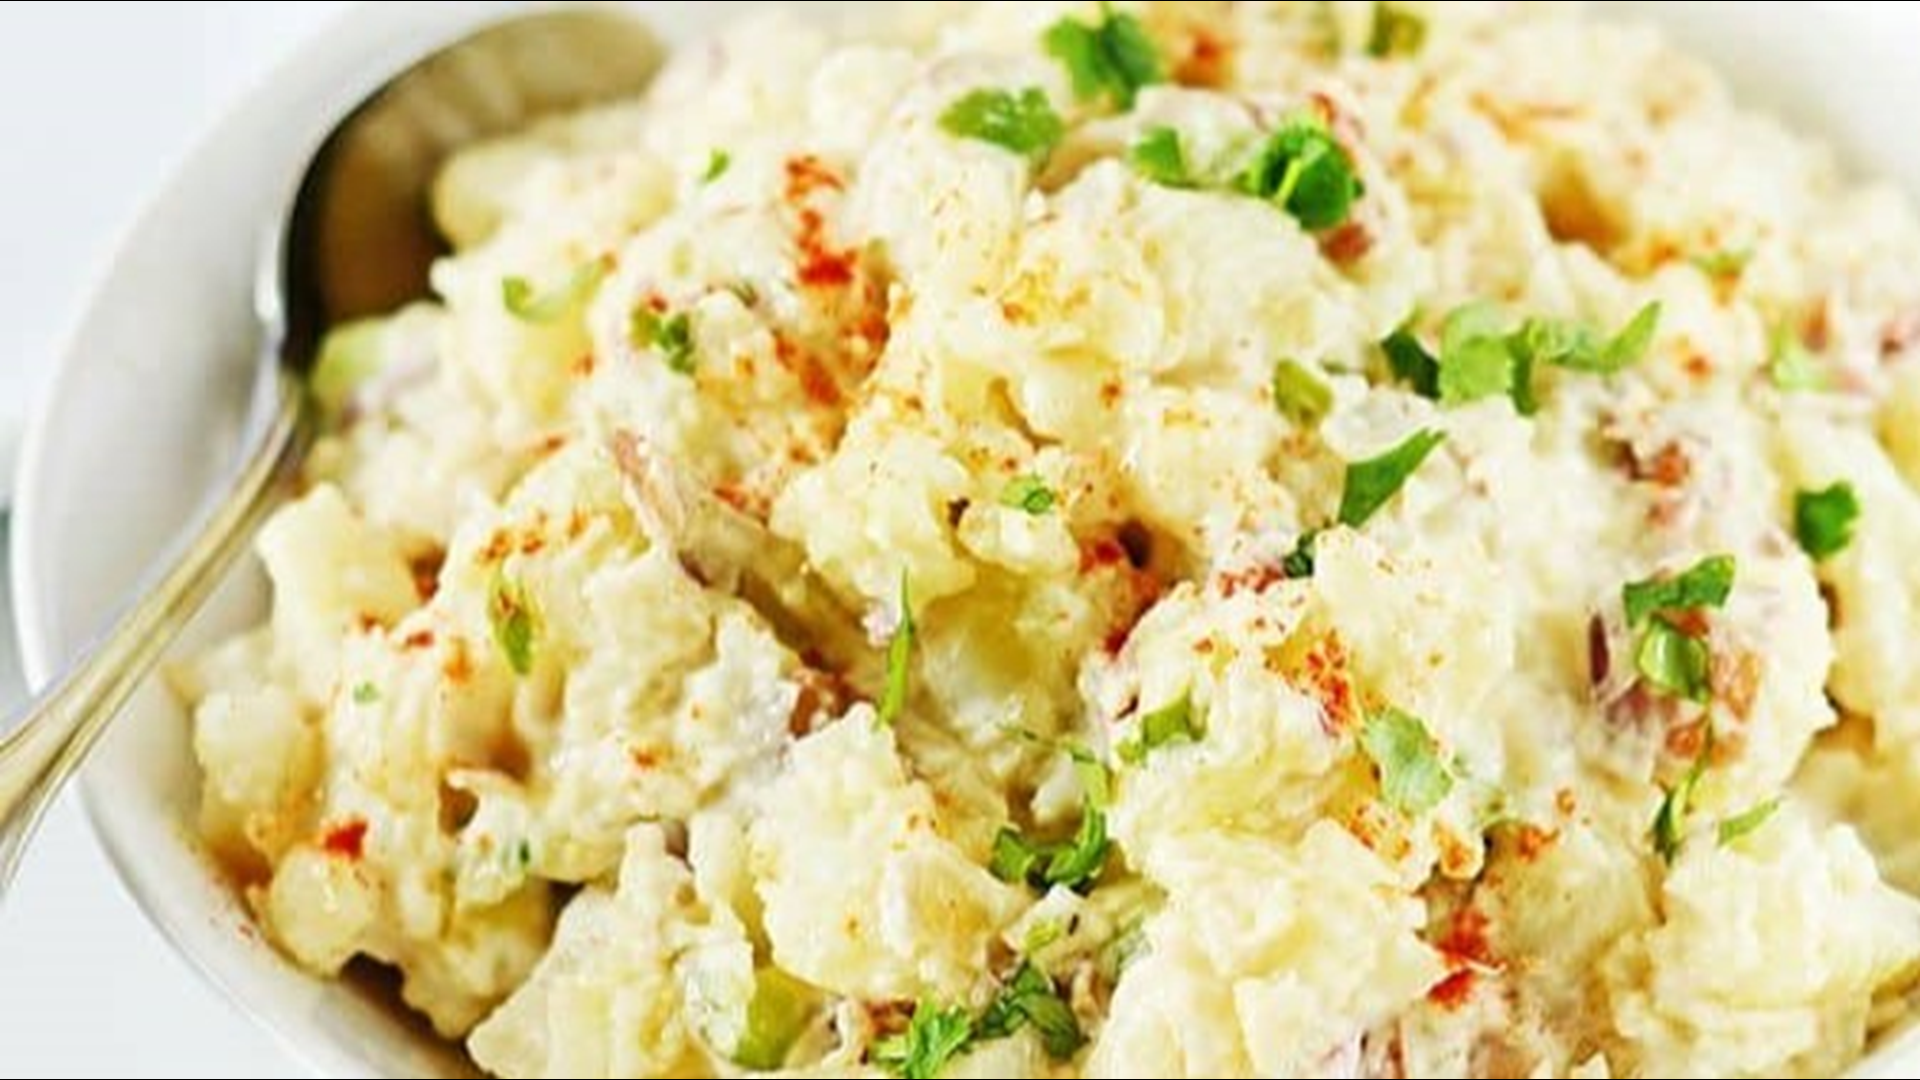 Looking for a healthy alternative for a summer side dish? The Feel Good Foodie Yumna Jawad shows us how to make potato salad made with cauliflower instead of potatoes.